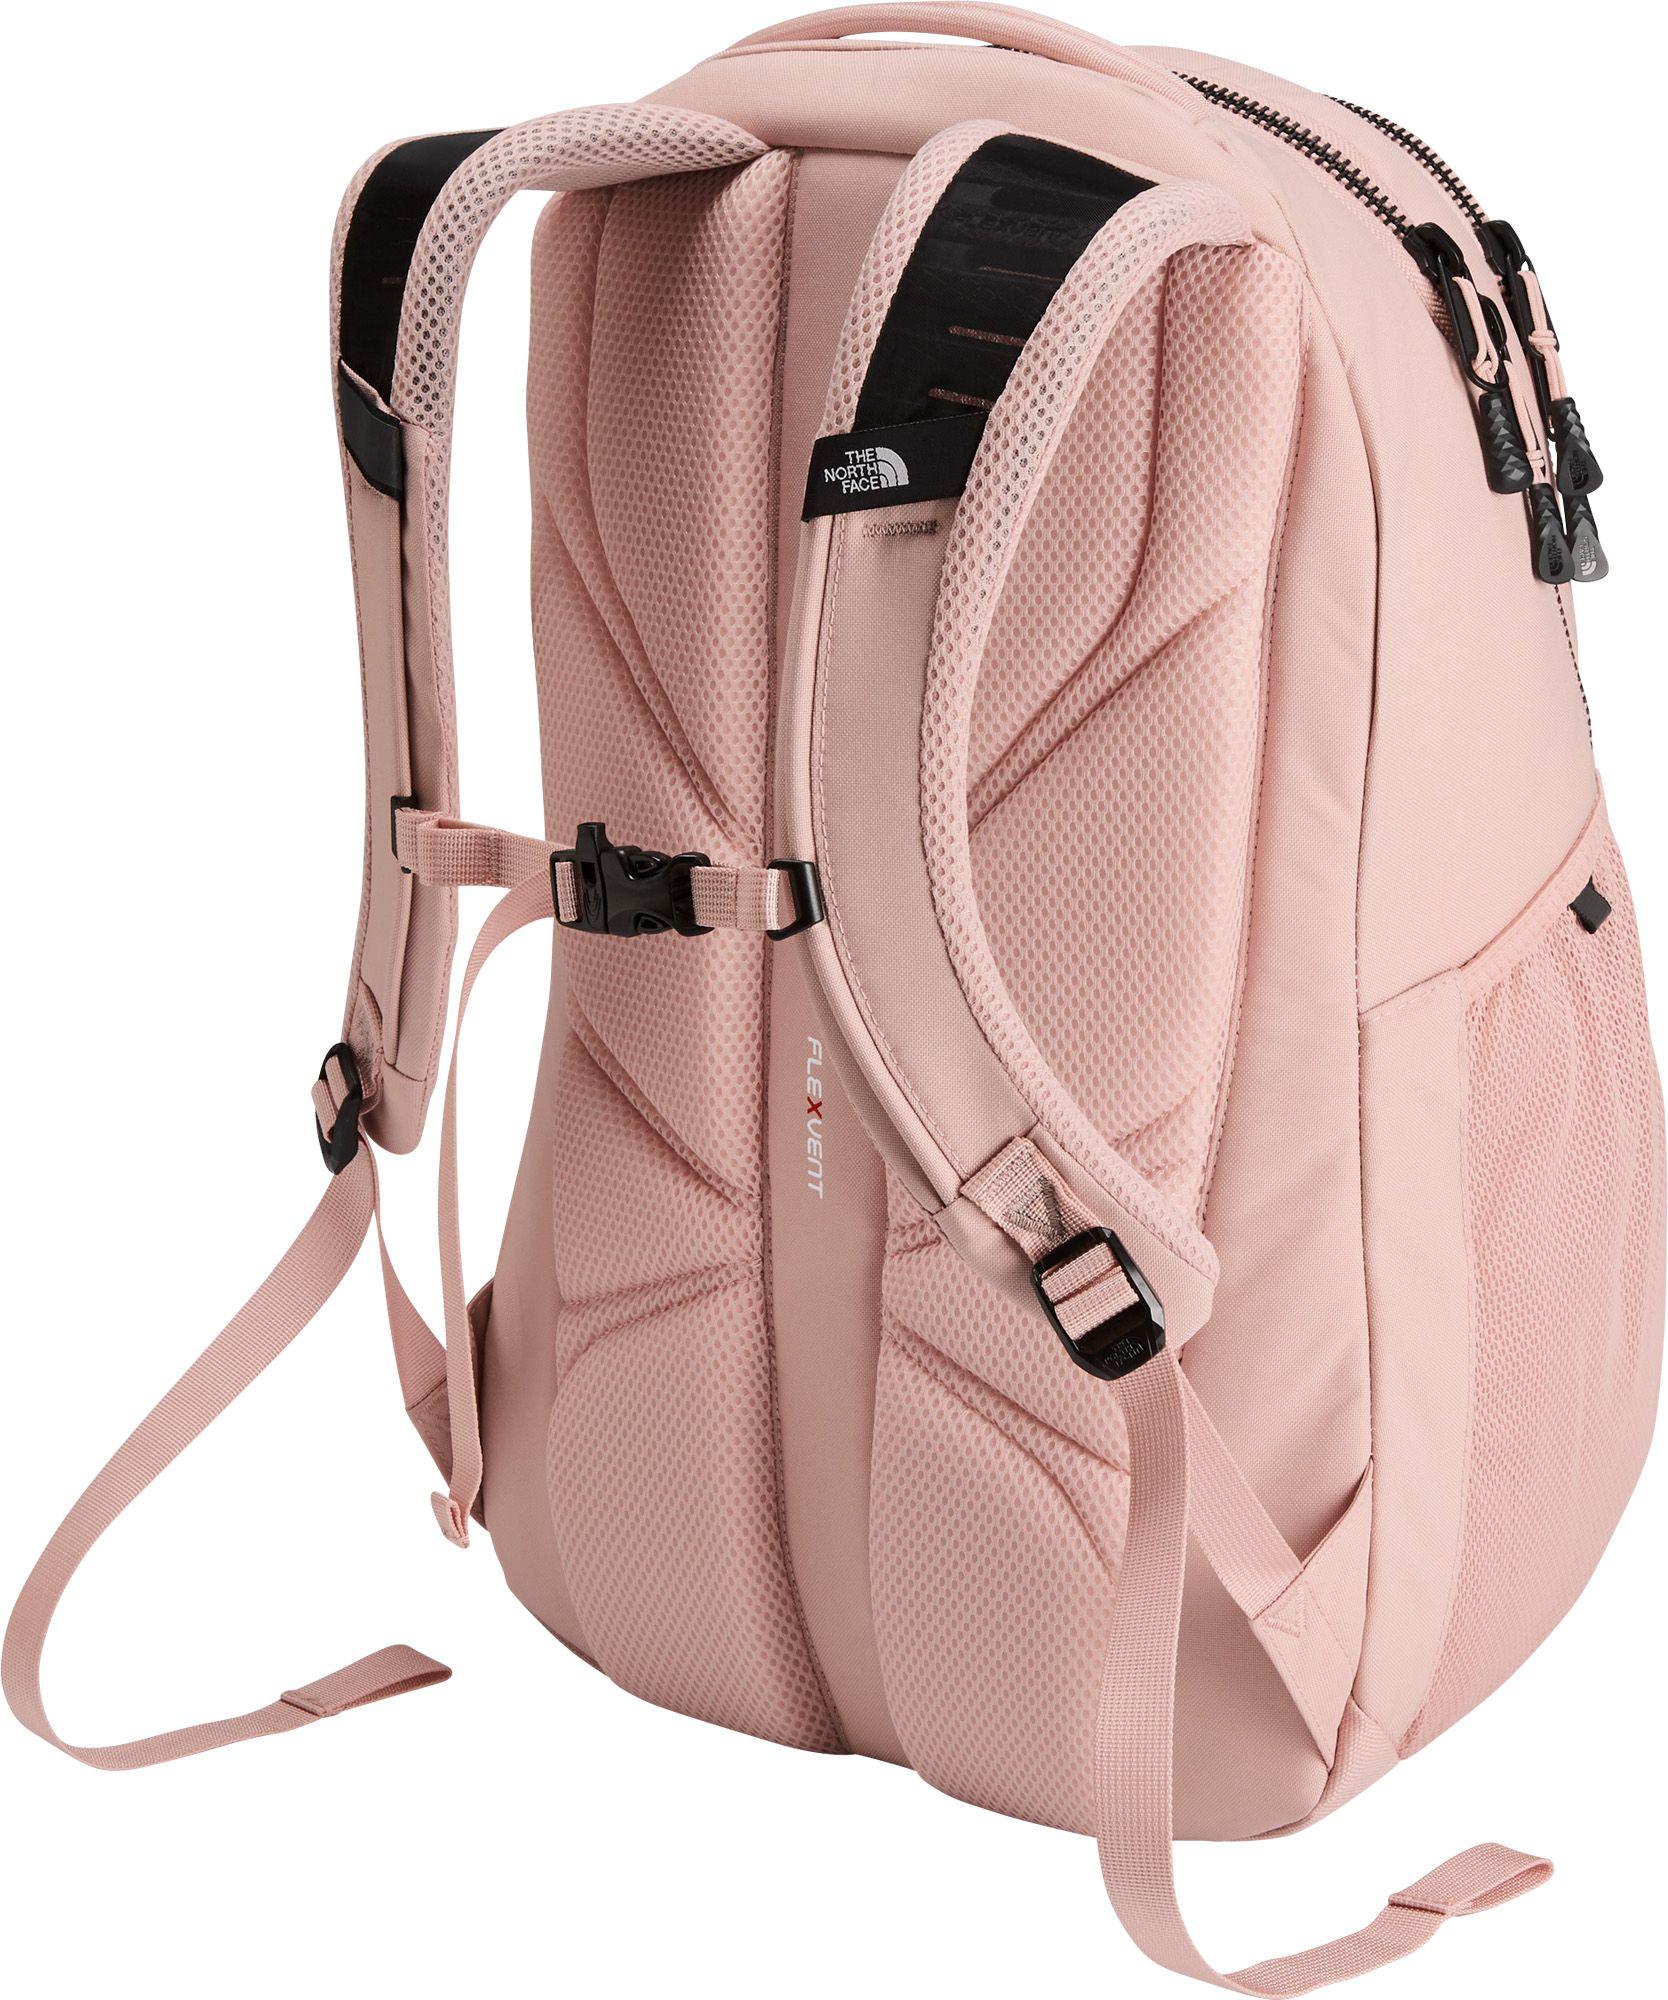 north face backpack jester luxe